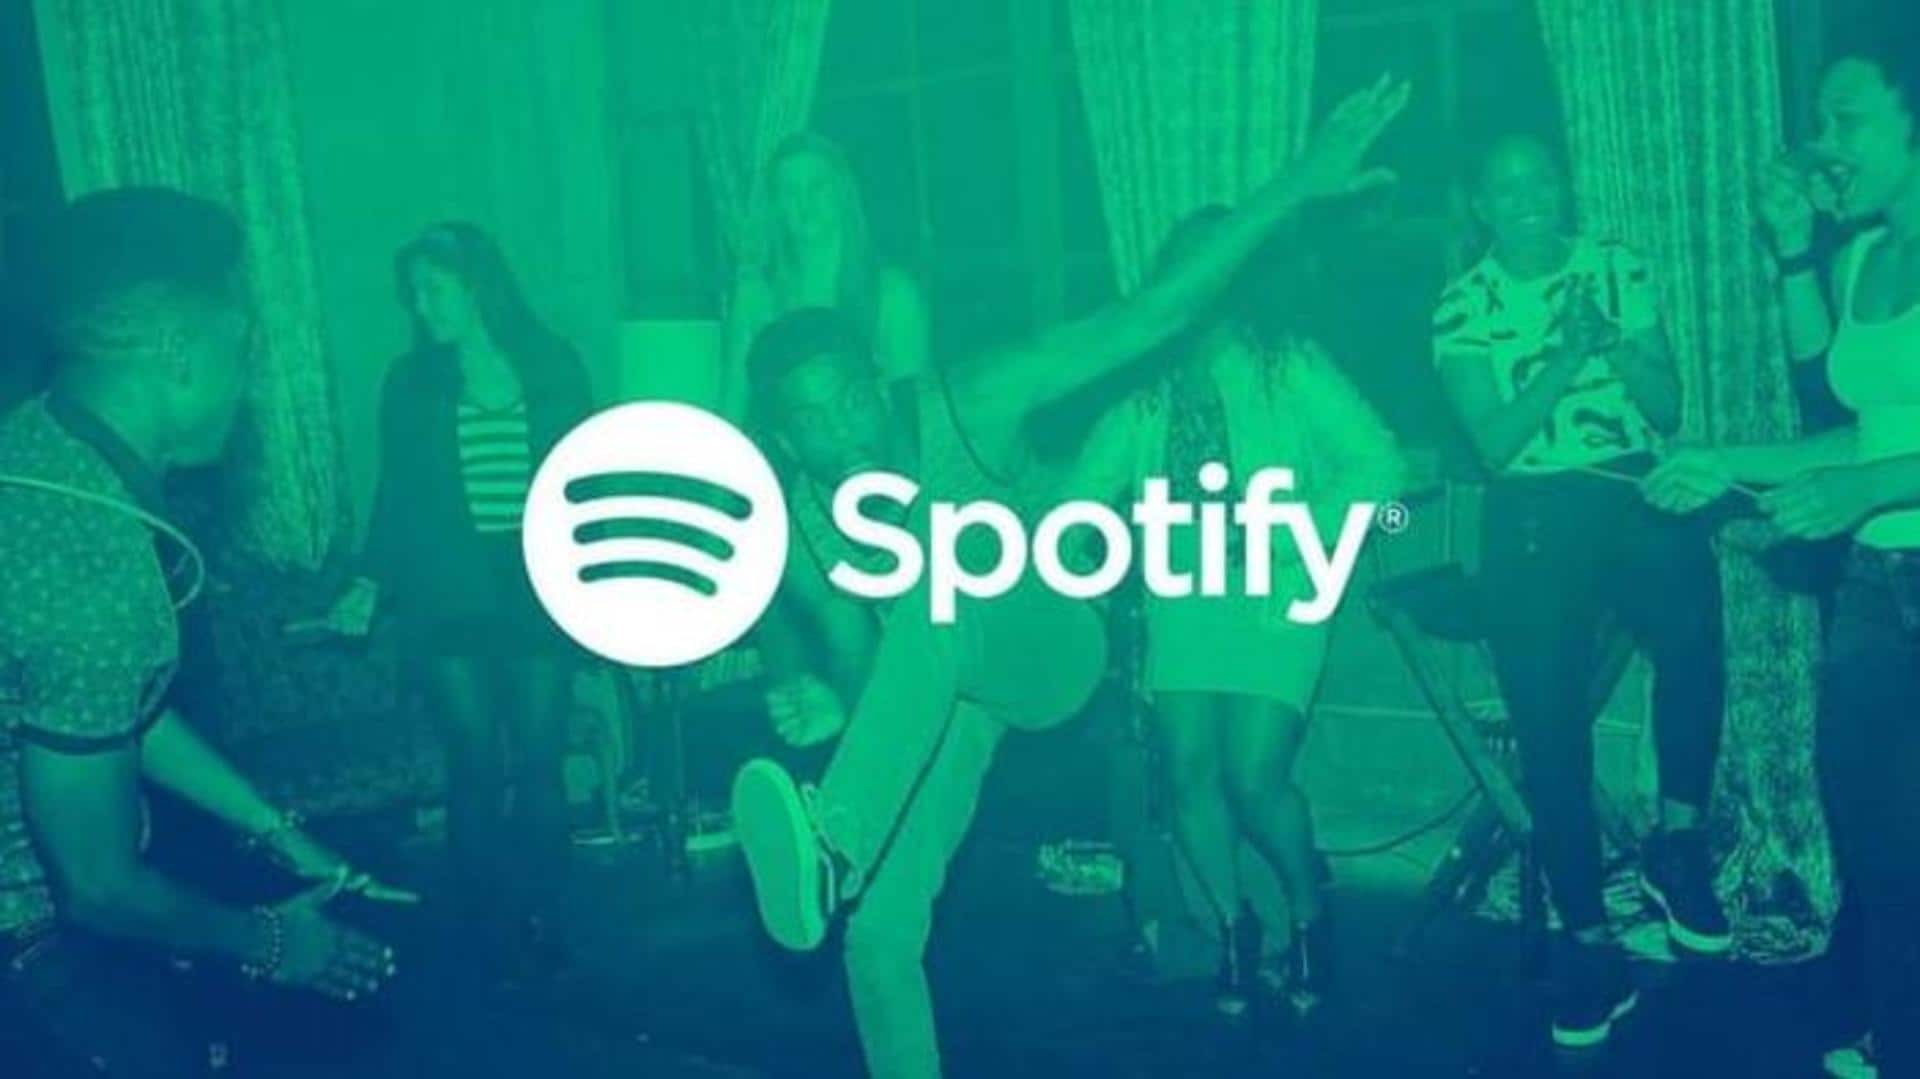 What makes Spotify more than just a music streaming service